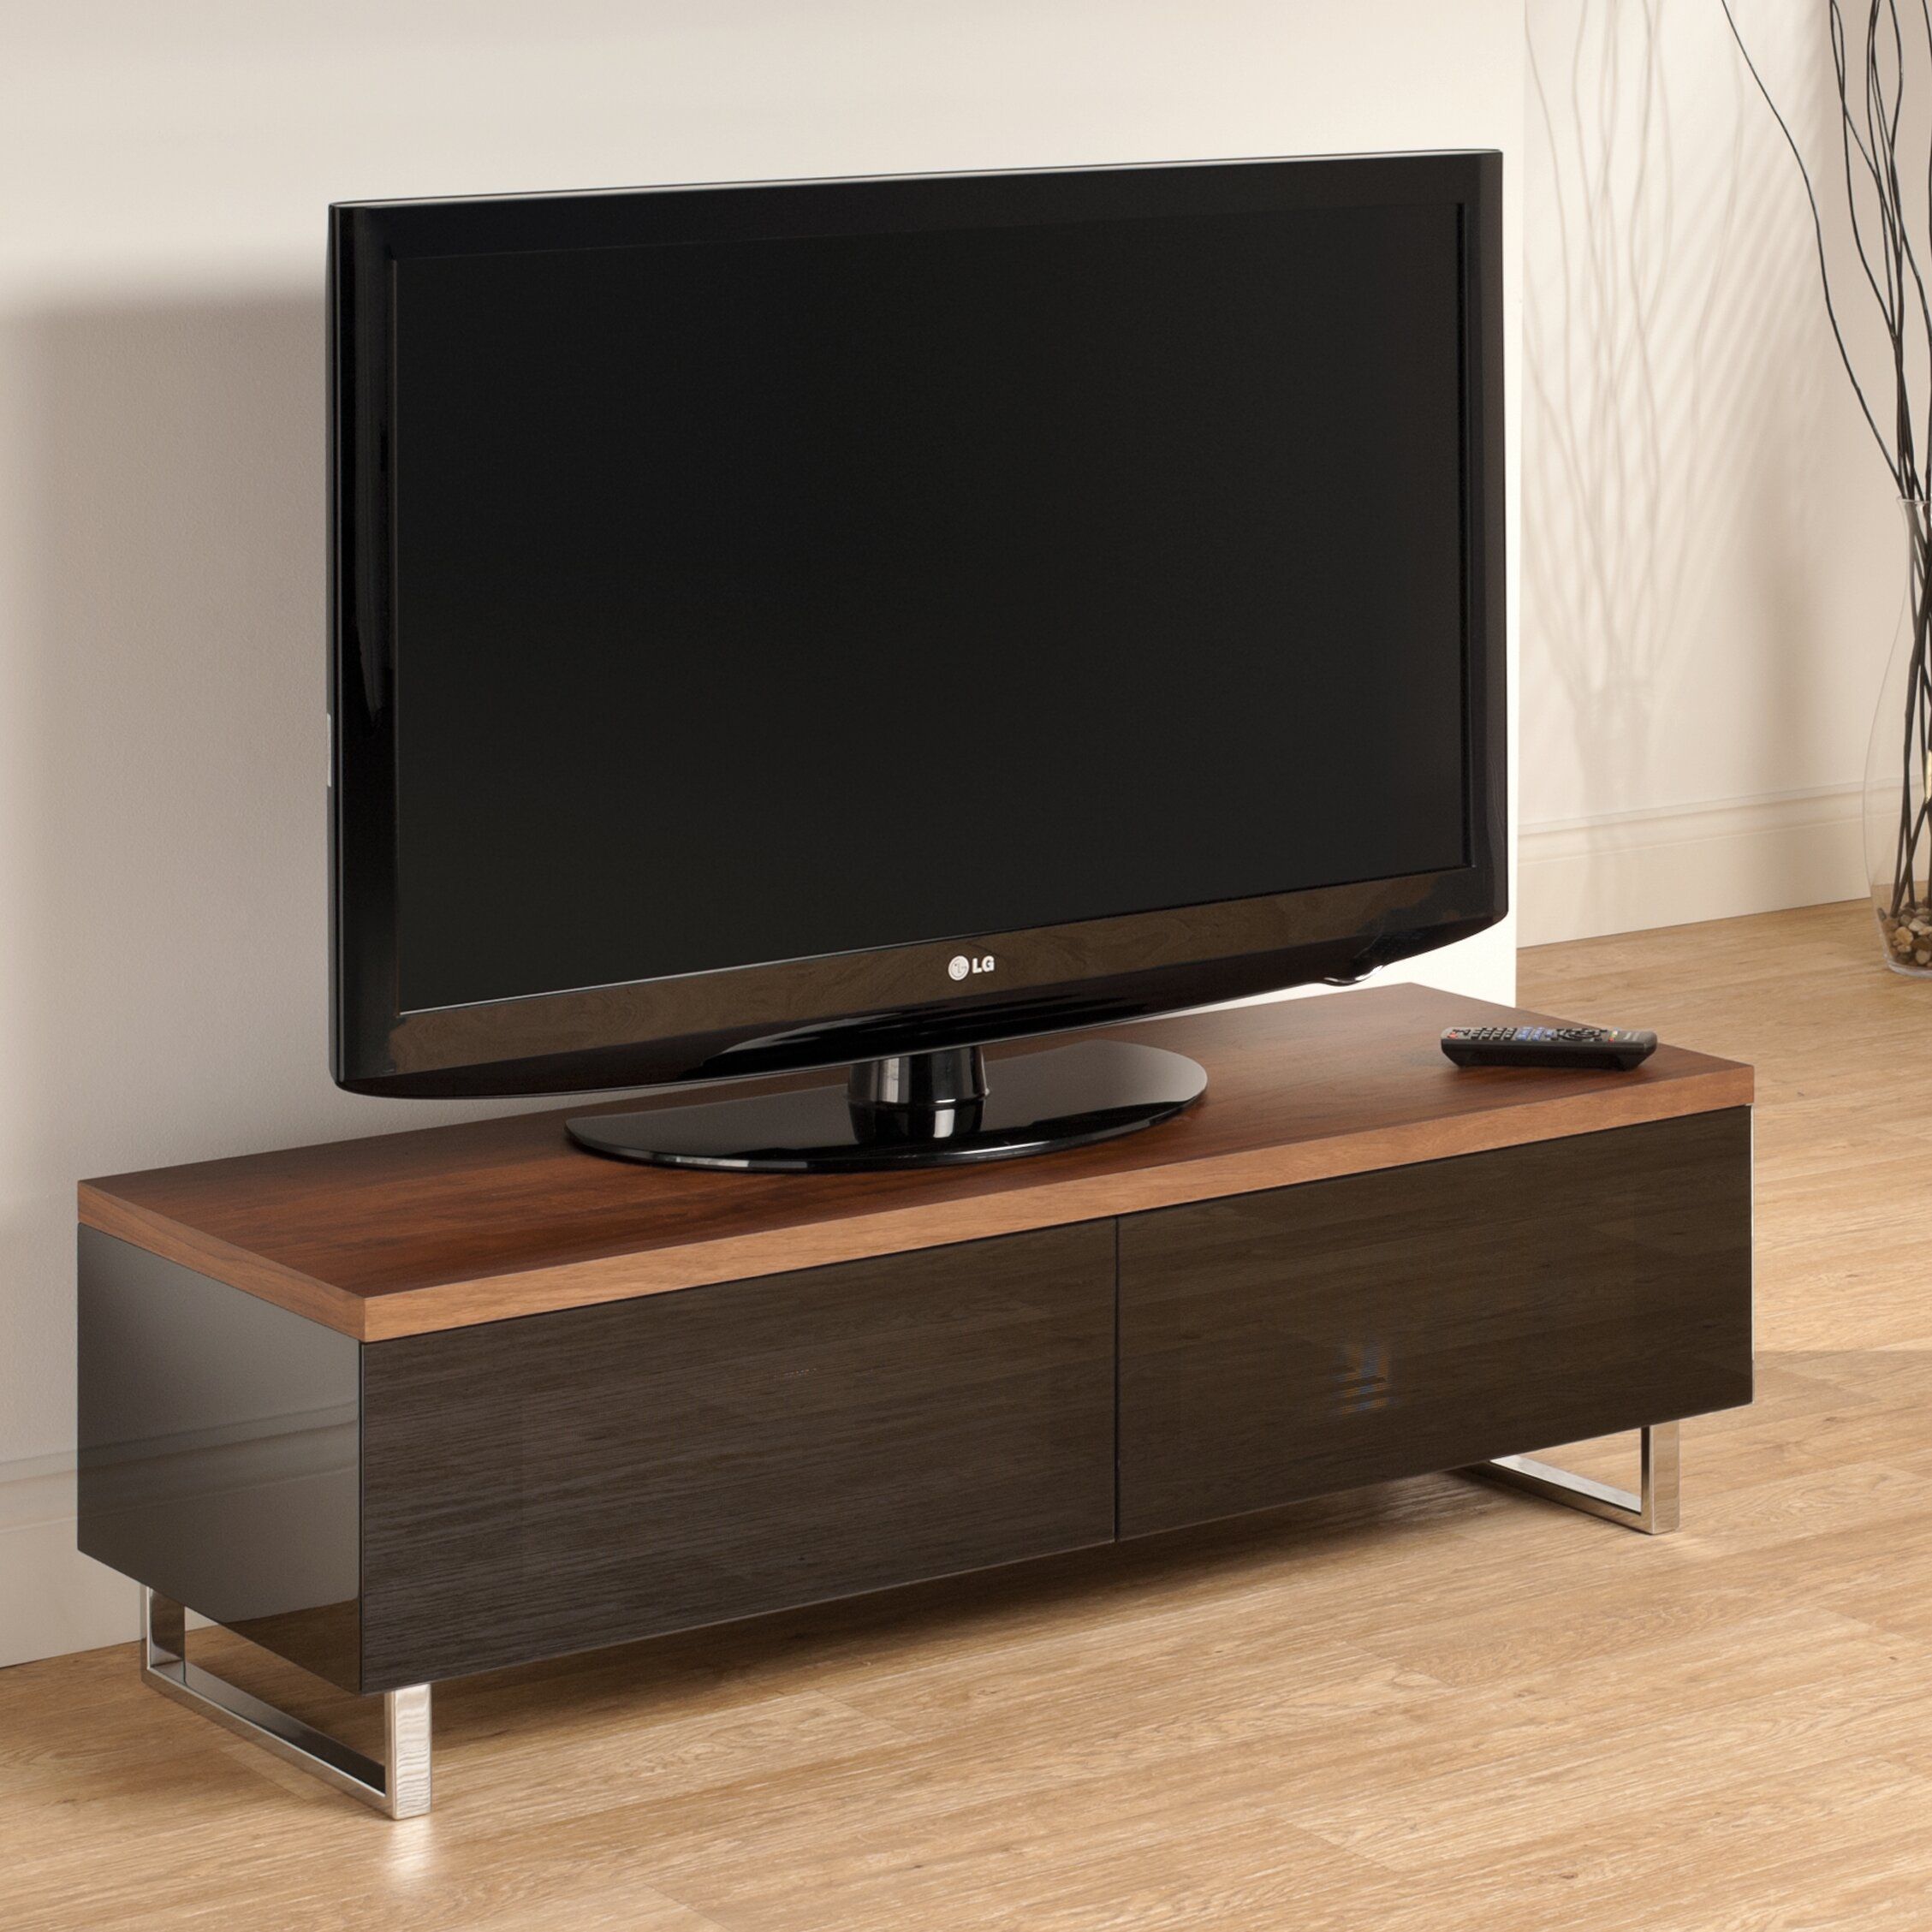 Techlink Panorama Tv Stand For Tvs Up To 60" & Reviews With Techlink Arena Tv Stands (View 2 of 15)